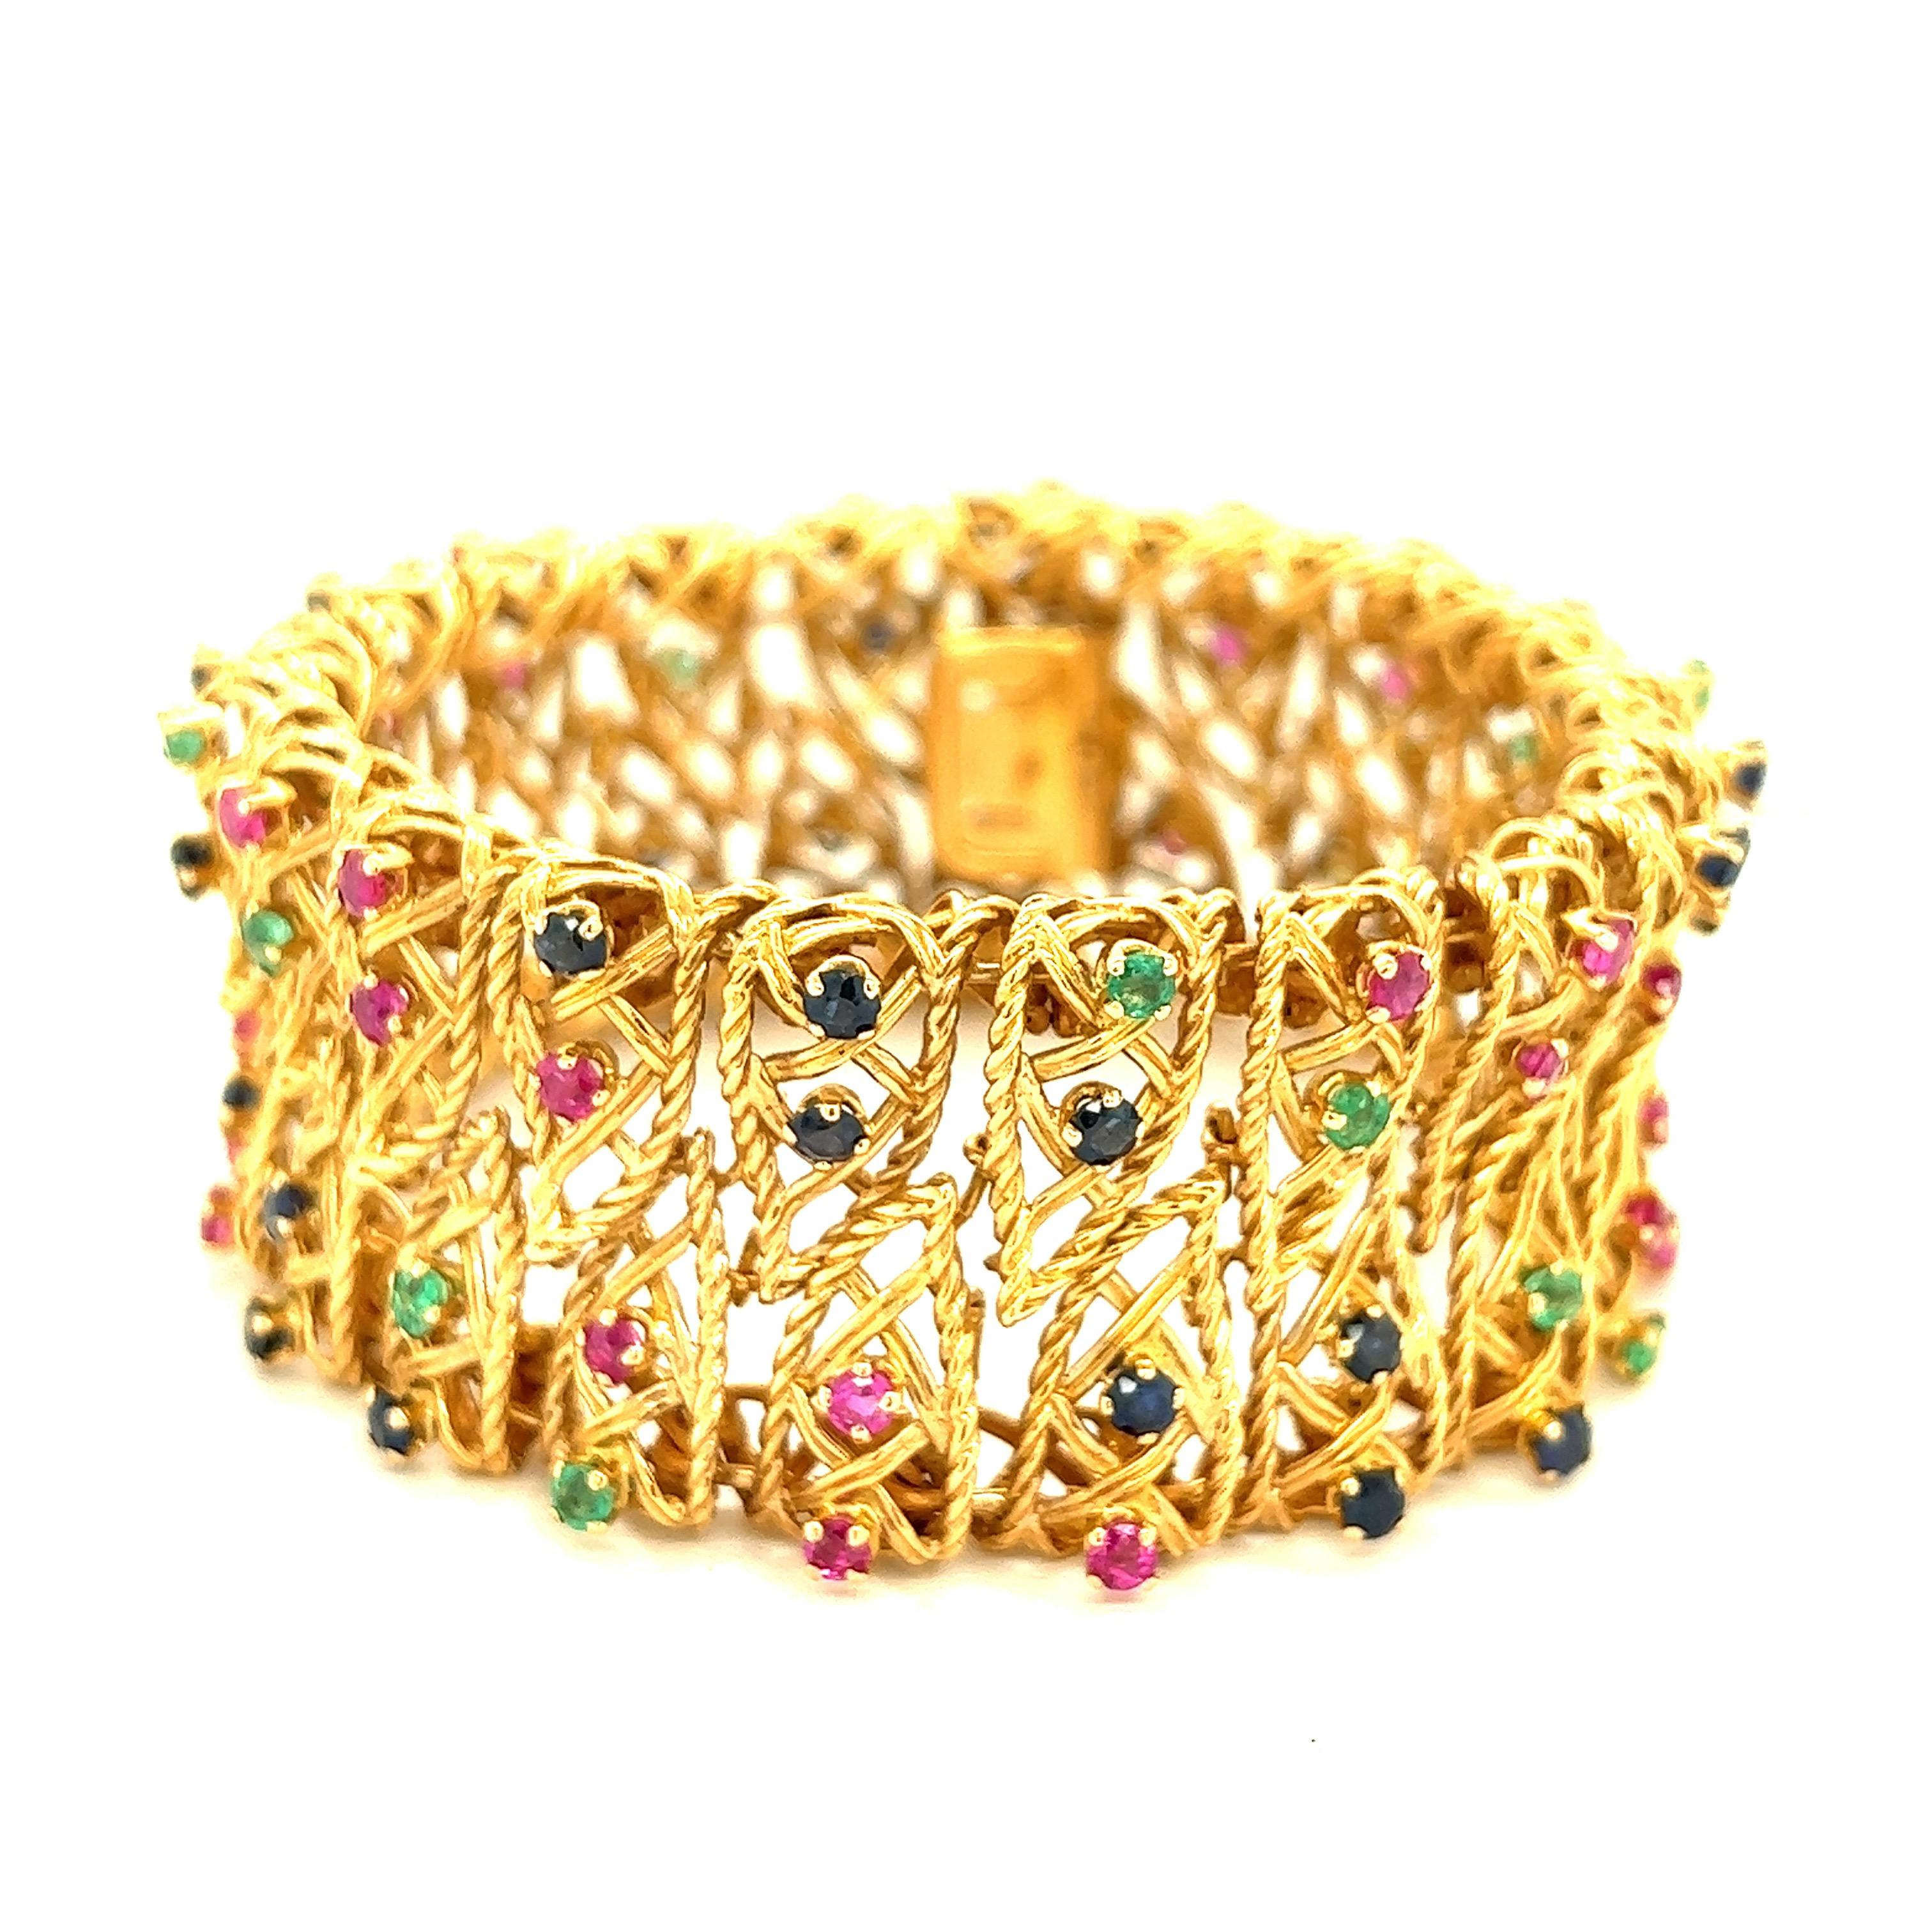 Ruby, Sapphire, & Emerald 18k Yellow Gold Bracelet 

Round-cut colored stones of 32 rubies (bright medium deep raspberry, cleanish to slightly included, several moderately included, lively); 32 sapphires (several brighter royal blue, mostly dark